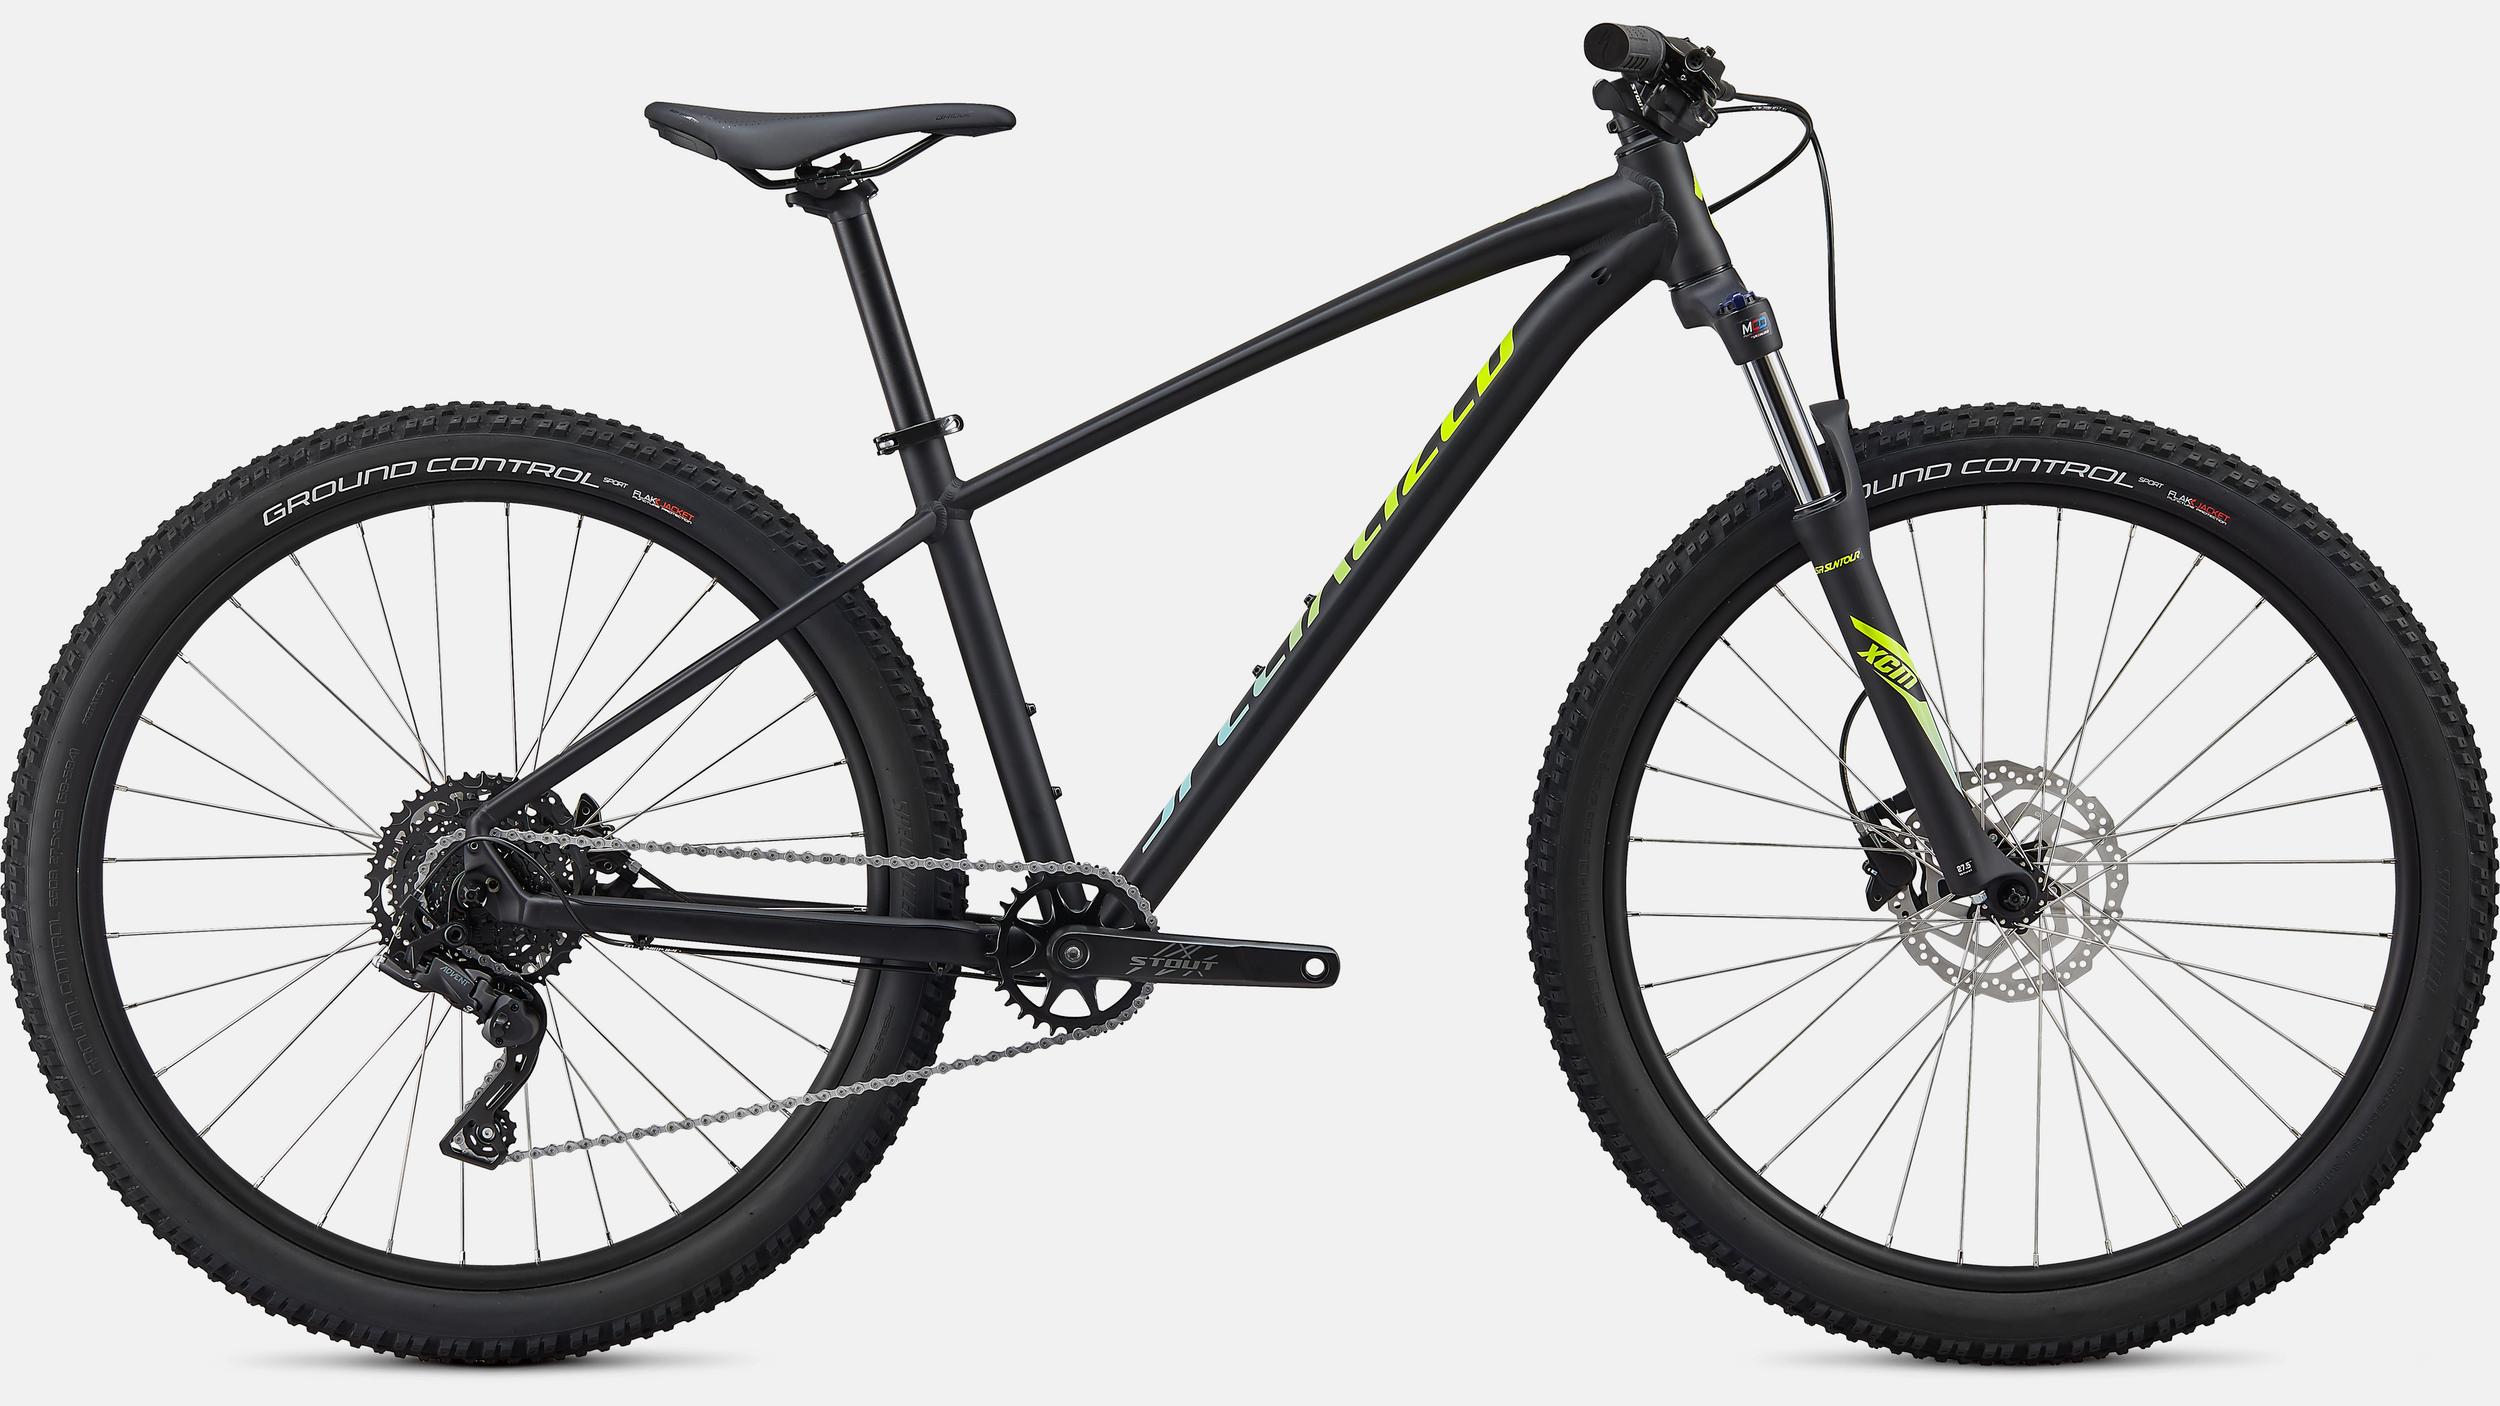 Paint for 2020 Specialized Pitch Comp 1X - Satin Black